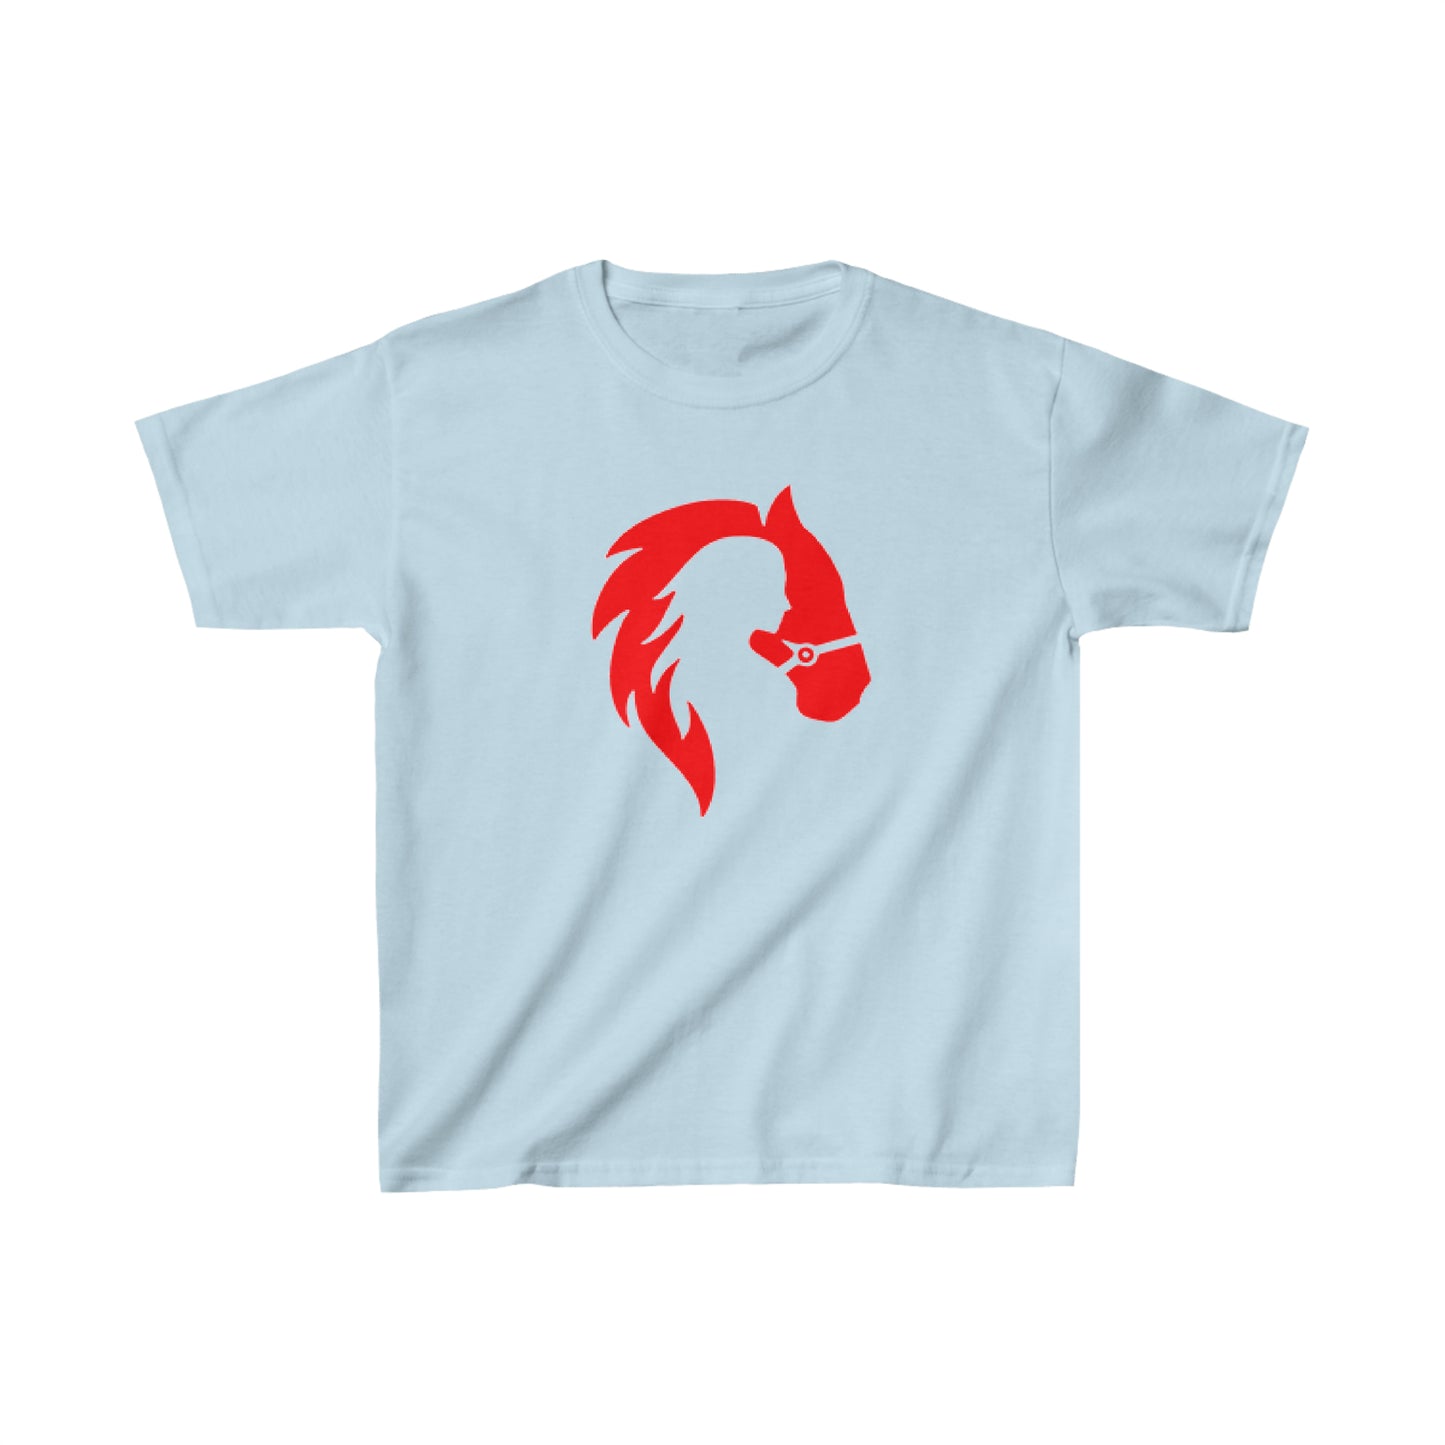 Silhouette of Girl and Horse - Kids Cotton Tee - Red Logo